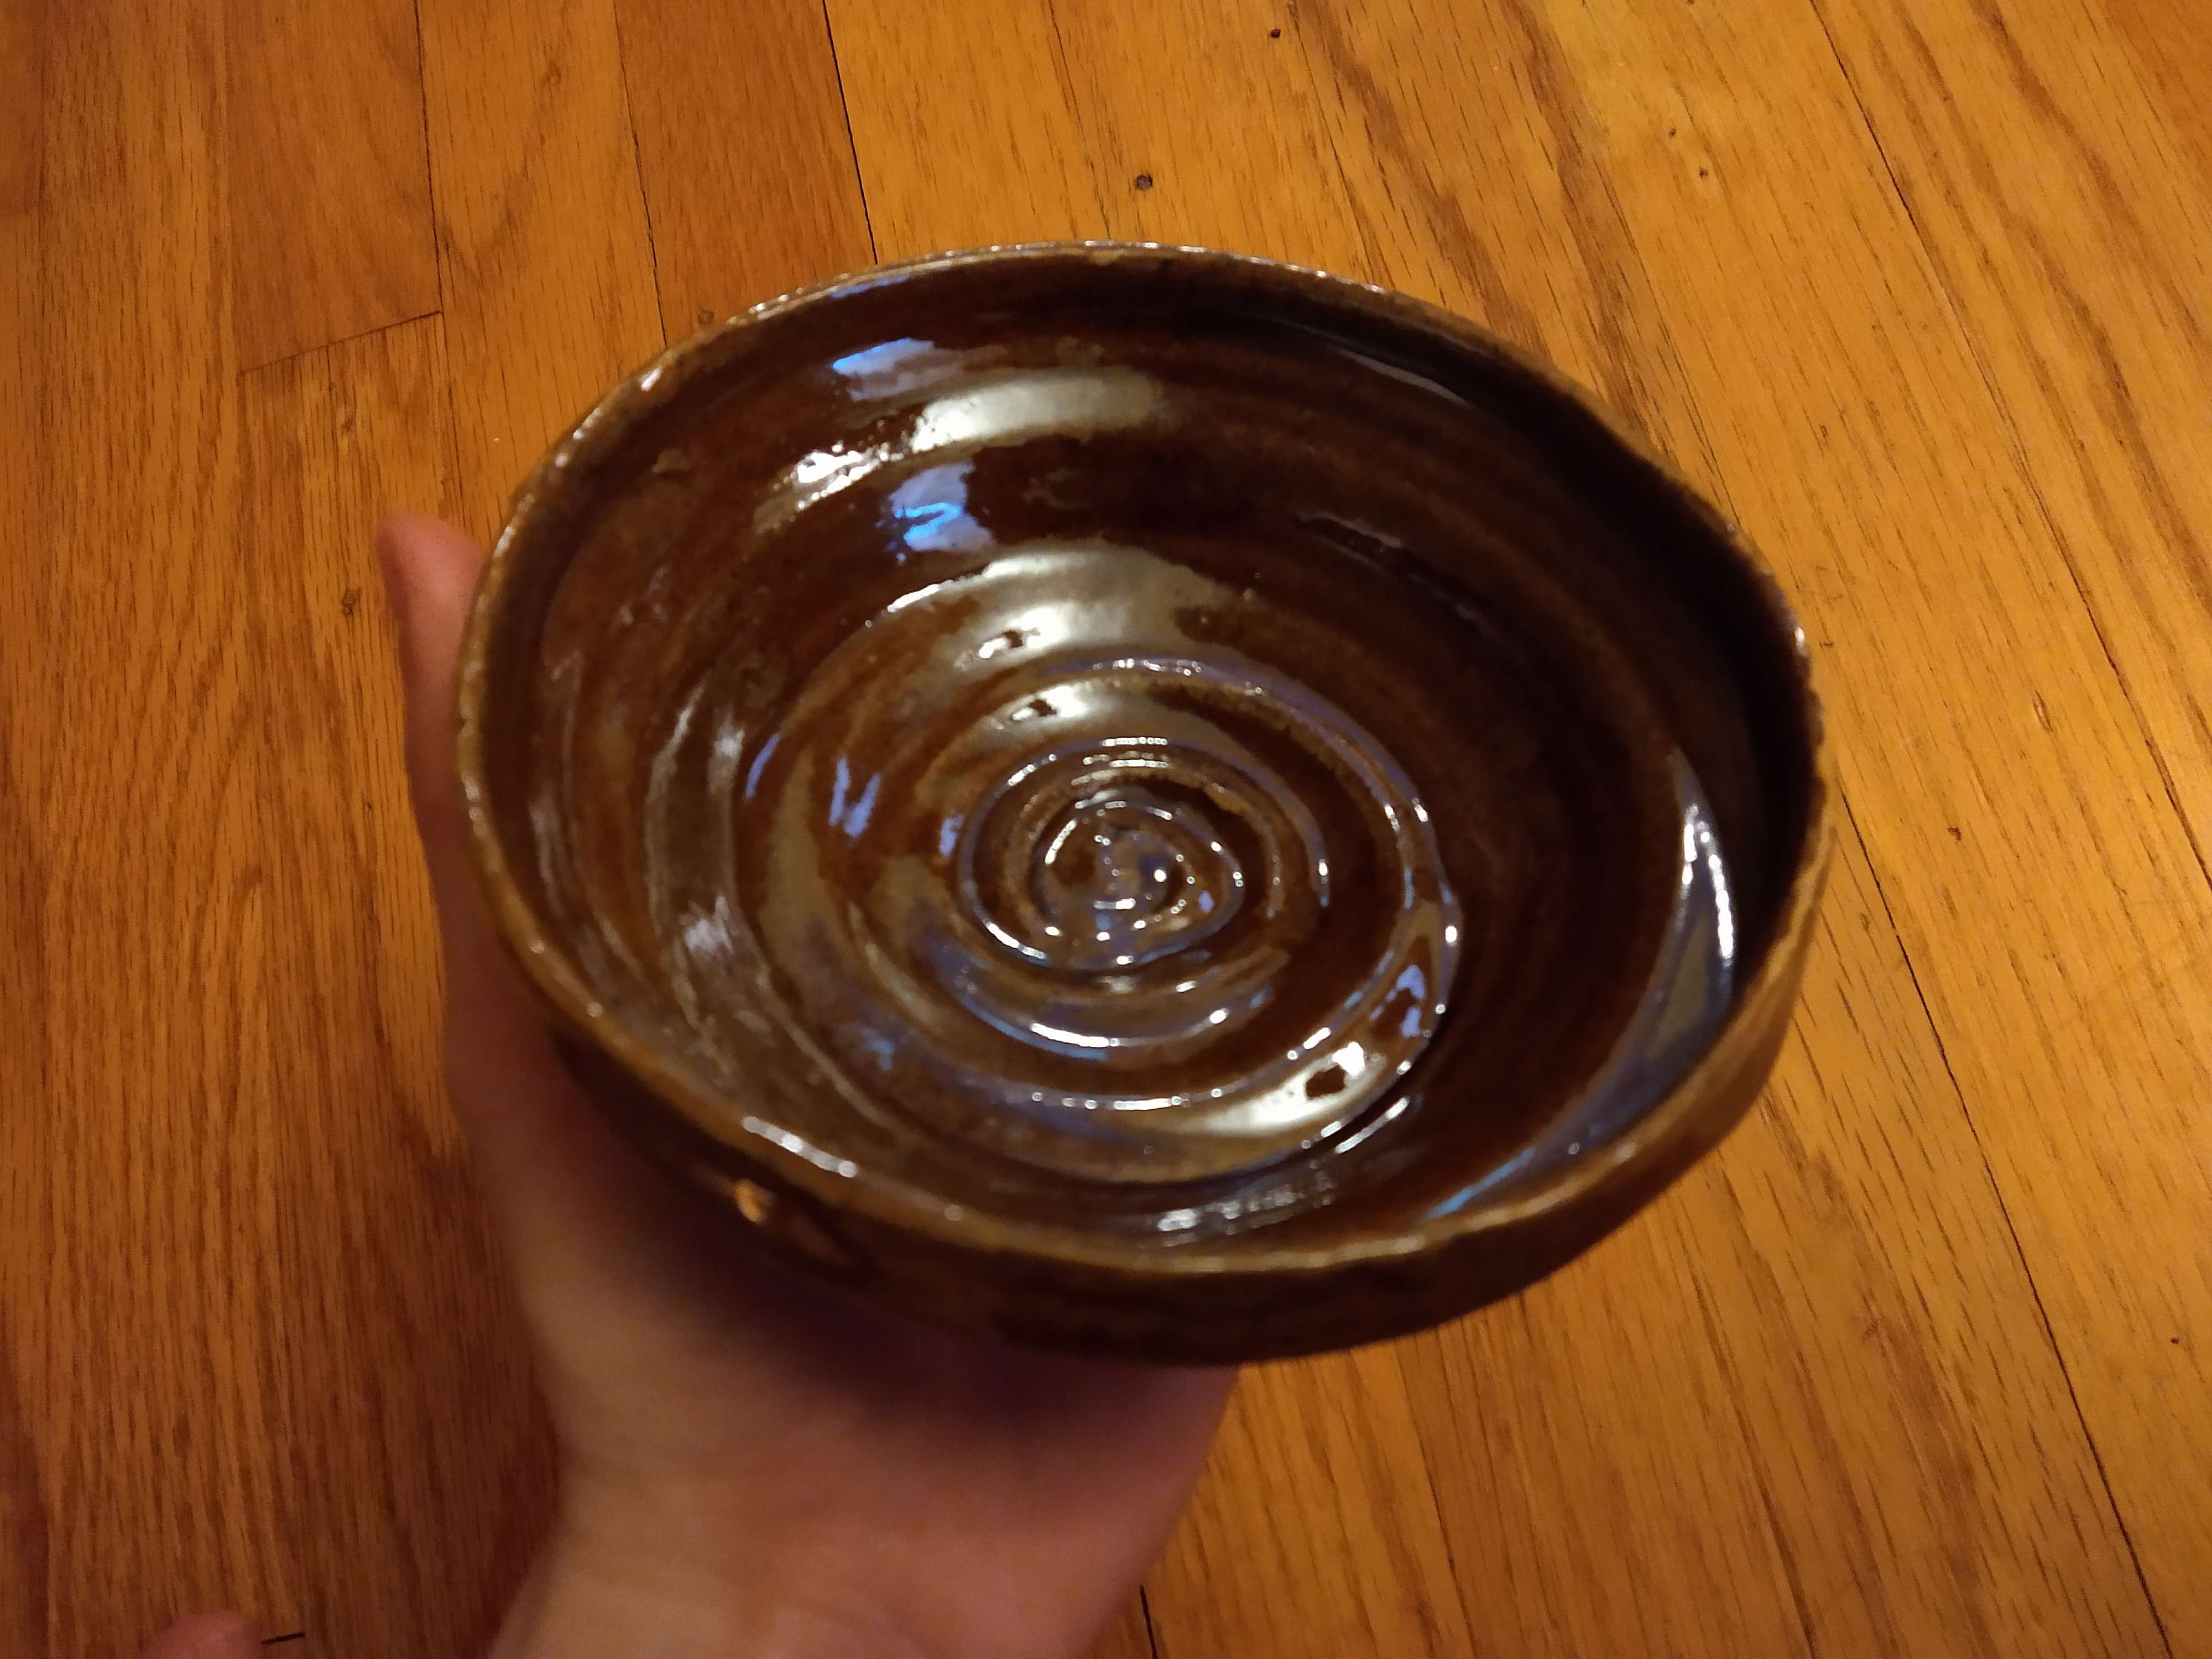 A wide, shallow brown bowl with a spiral groove in it that has a rose-like pattern.